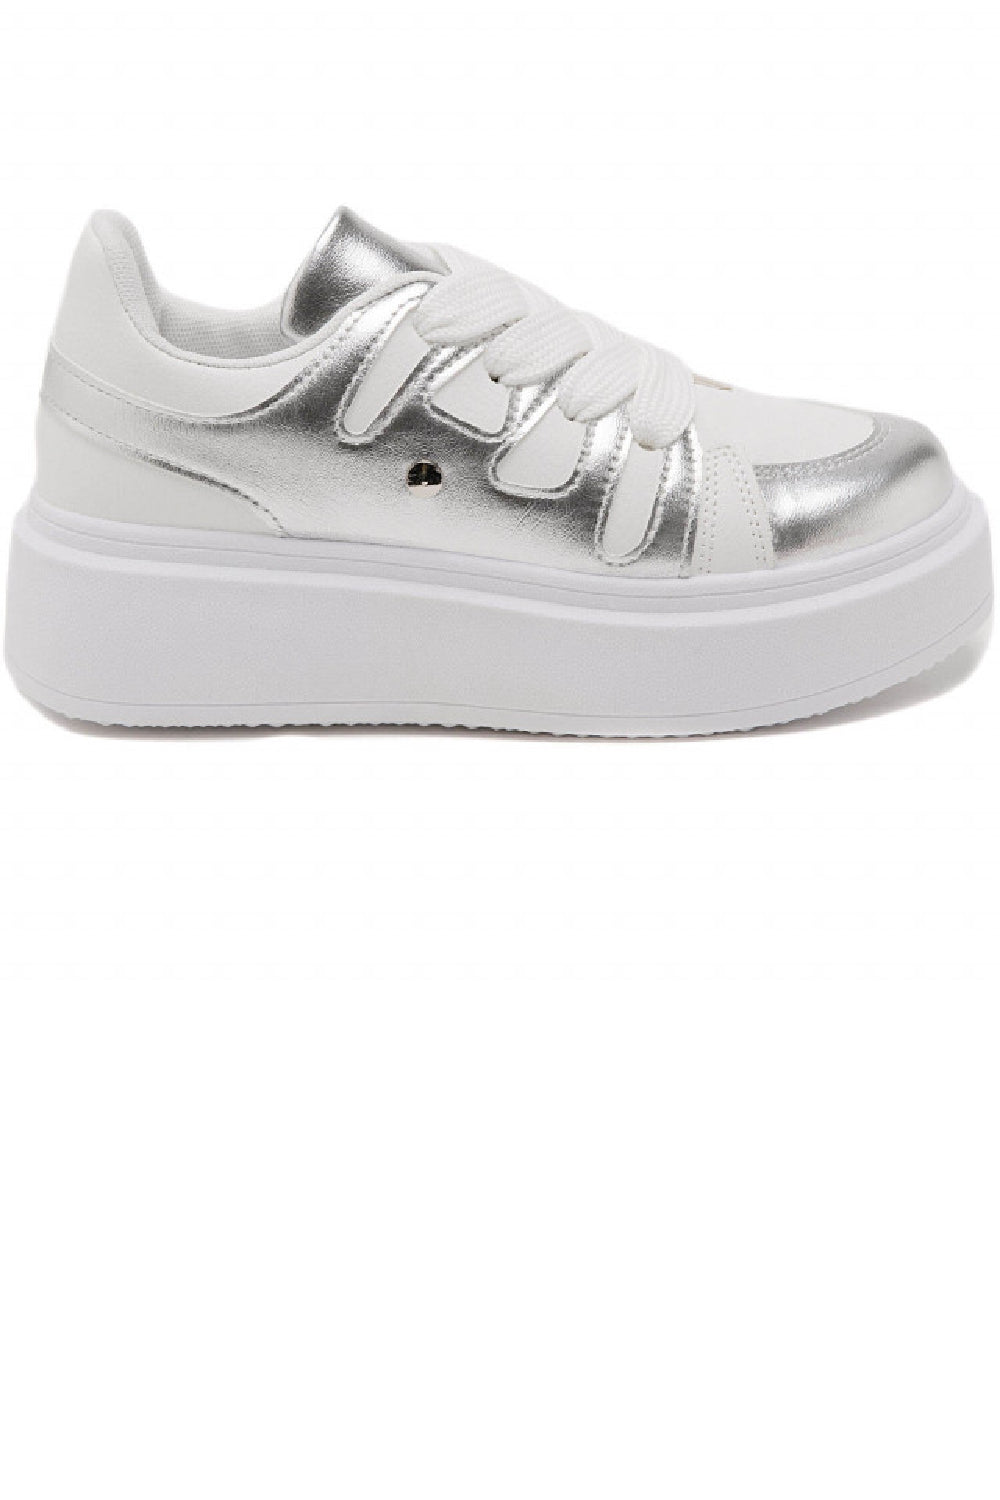 SILVER LACE UP CHUNKY TRAINERS SHOES